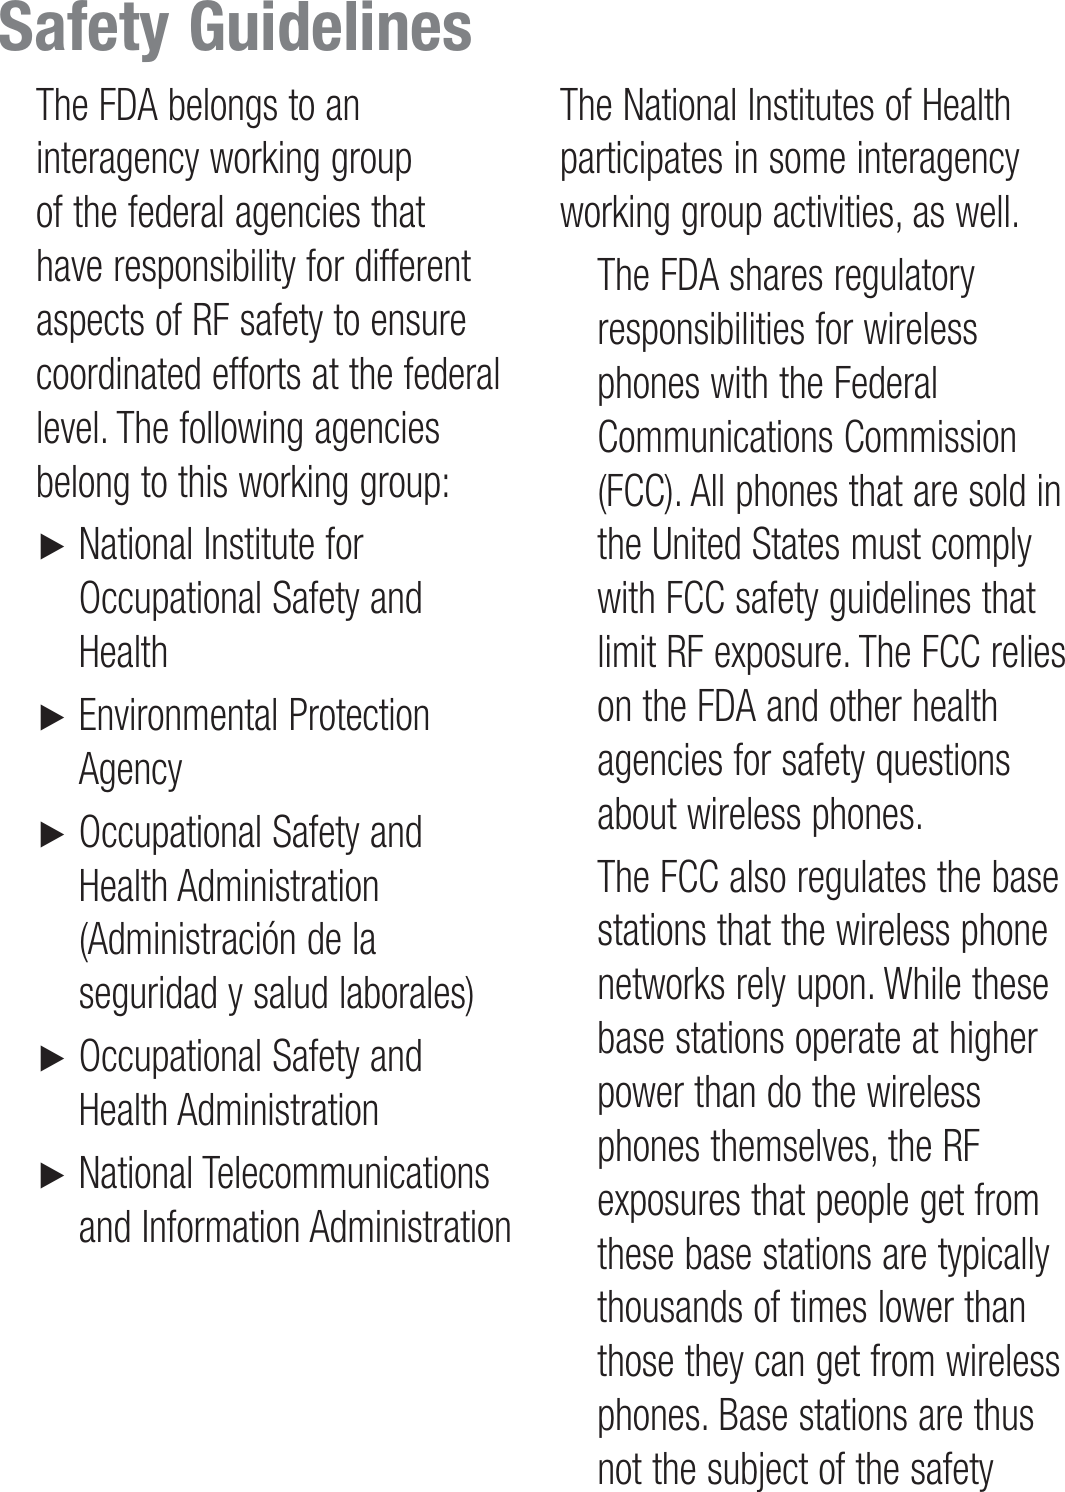    The FDA belongs to an interagency working group of the federal agencies that have responsibility for different aspects of RF safety to ensure coordinated efforts at the federal level. The following agencies belong to this working group: ►       National Institute for Occupational Safety and Health ►         Environmental  Protection Agency ►       Occupational Safety and Health Administration (Administración de la seguridad y salud laborales) ►       Occupational Safety and Health Administration ►       National  Telecommunications and Information Administration The National Institutes of Health participates in some interagency working group activities, as well.   The FDA shares regulatory responsibilities for wireless phones with the Federal Communications Commission (FCC). All phones that are sold in the United States must comply with FCC safety guidelines that limit RF exposure. The FCC relies on the FDA and other health agencies for safety questions about wireless phones.   The FCC also regulates the base stations that the wireless phone networks rely upon. While these base stations operate at higher power than do the wireless phones themselves, the RF exposures that people get from these base stations are typically thousands of times lower than those they can get from wireless phones. Base stations are thus not the subject of the safety Safety Guidelines